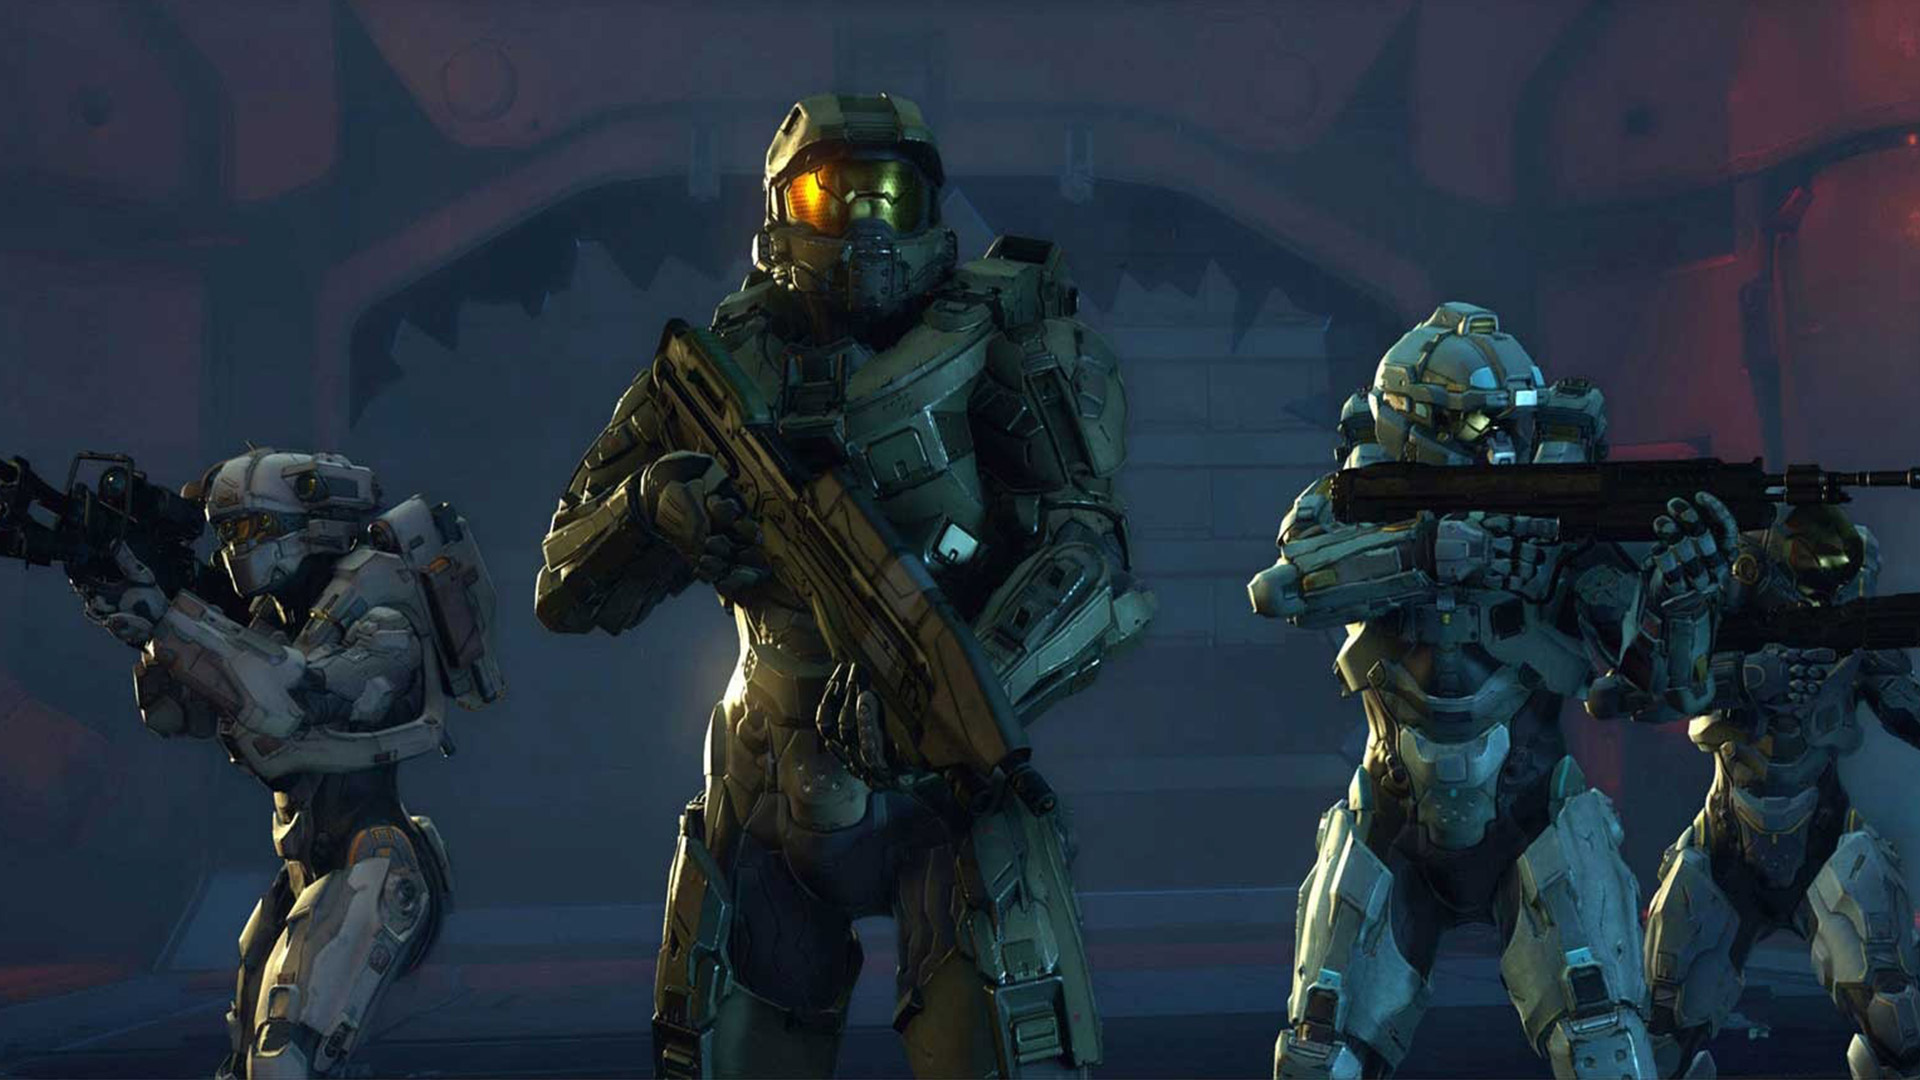 A Well Hidden Halo 5 Easter Egg Was Finally Found After A Dev Shared Some Hints